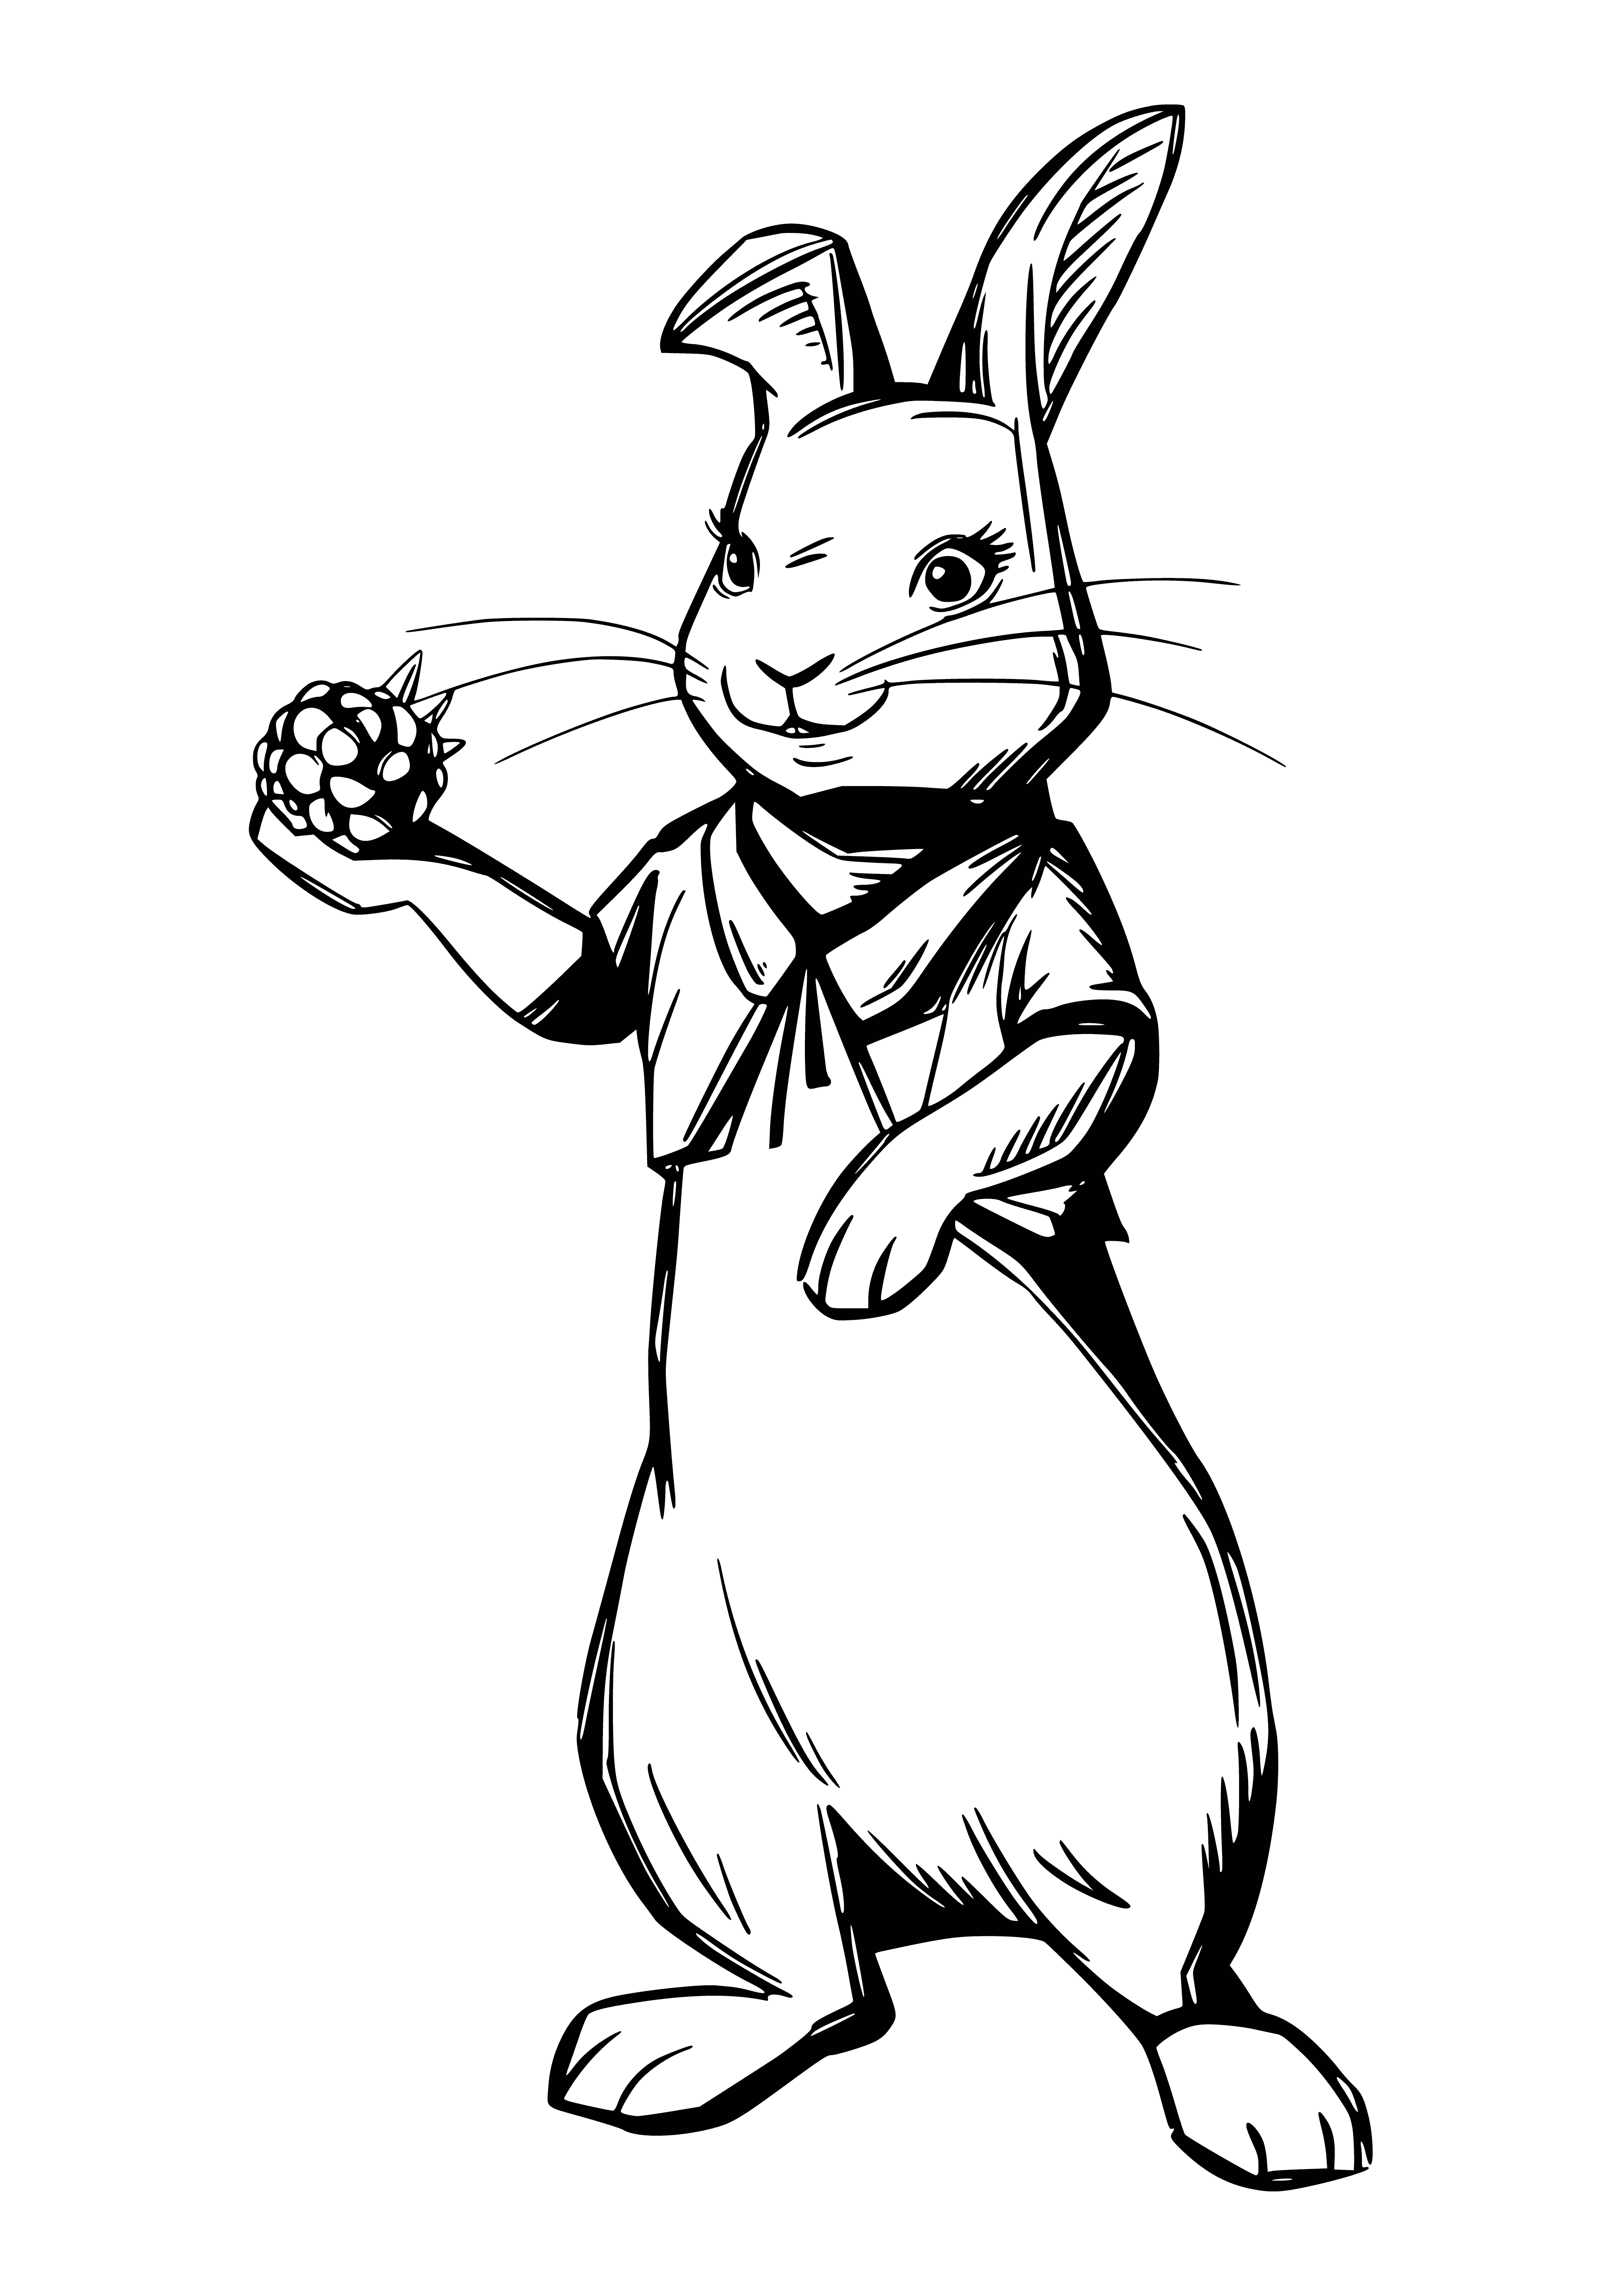 coloring page: A white rabbit with blue eyes wears a blue jacket, waistcoat and bow tie and holds an umbrella.